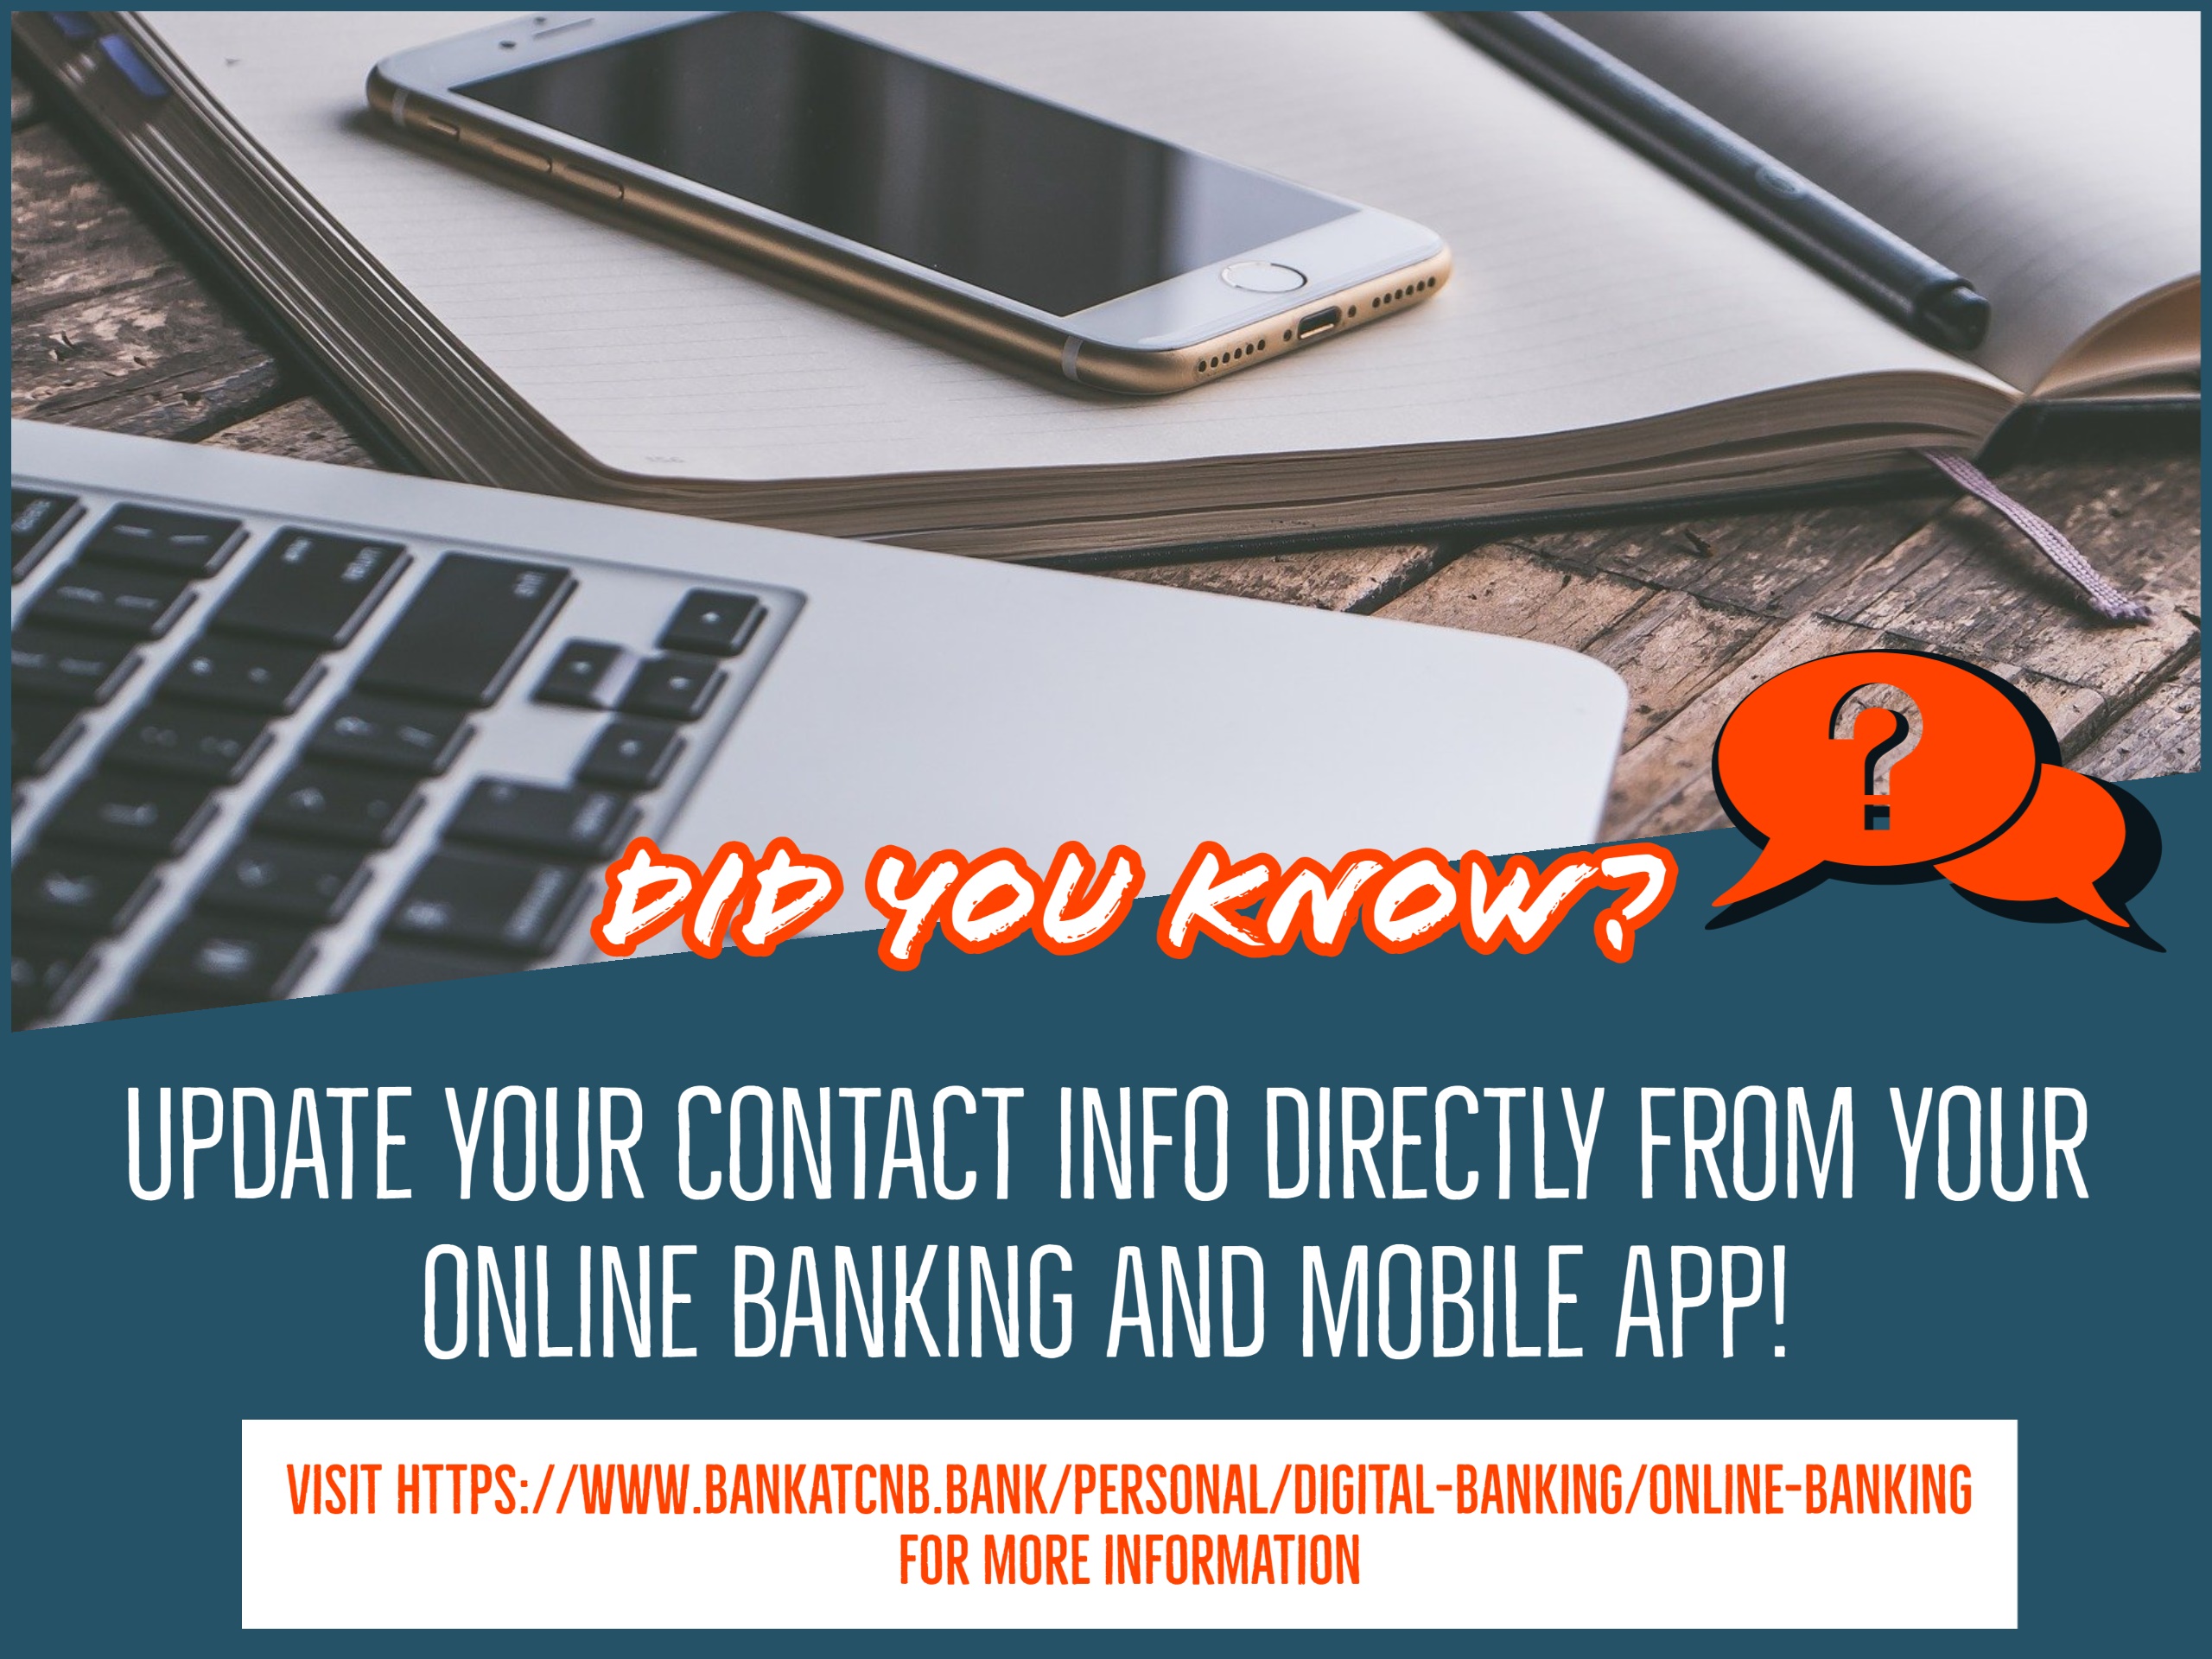 "did you know" graphic explaining that you can update your contact information via the CNB mobile banking app or online banking